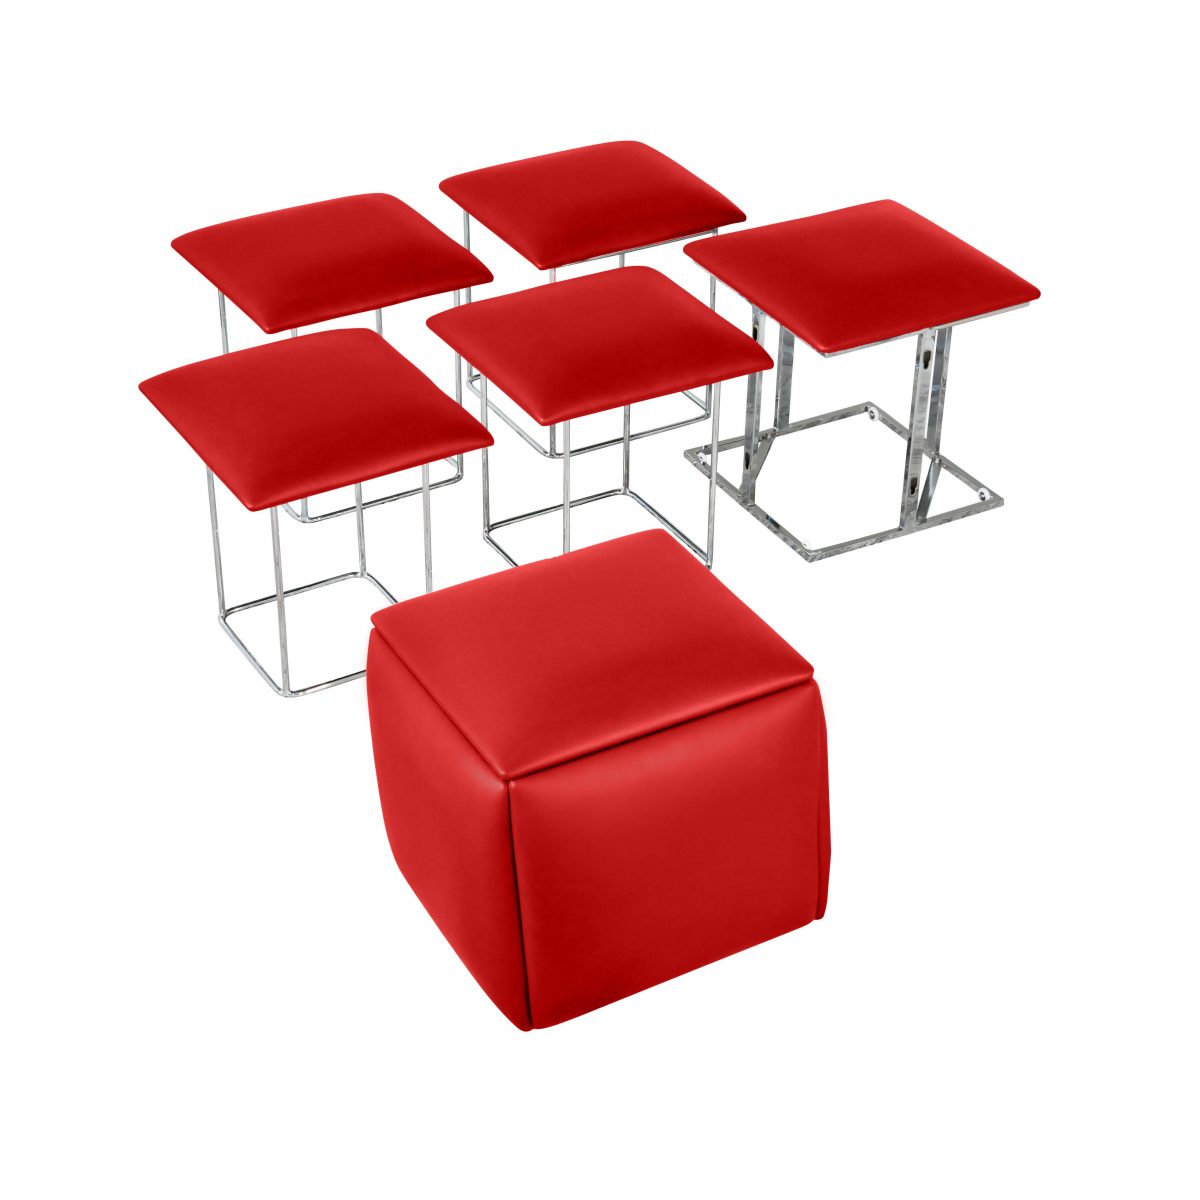 5 chairs in one cube